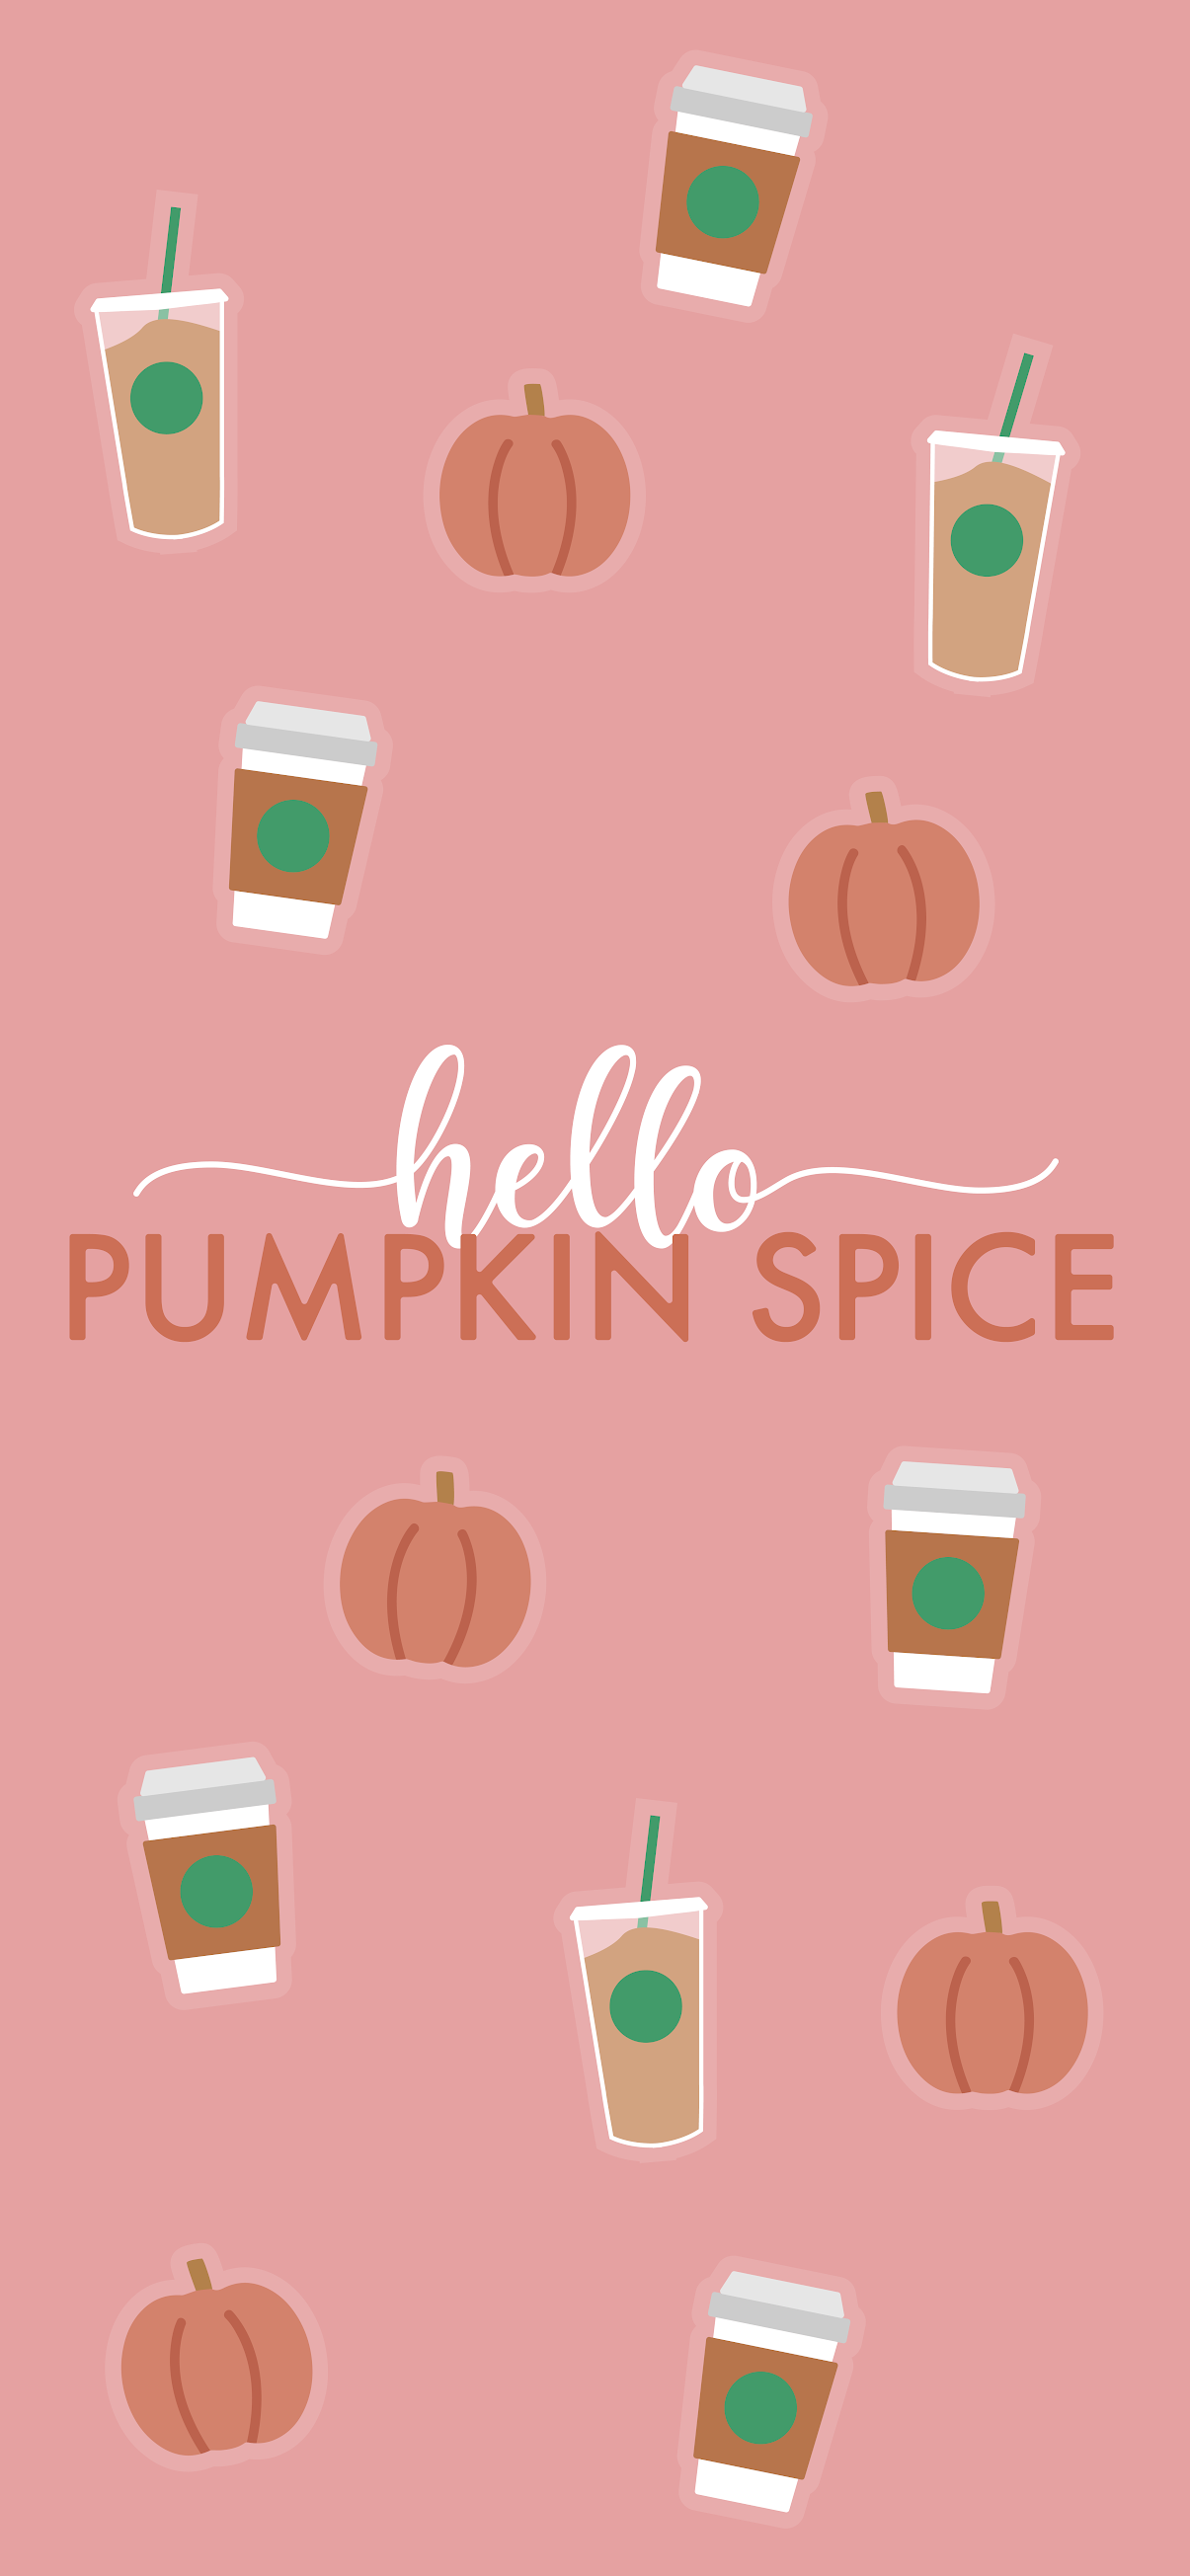 Blog Blog: Get Ready for Fall with these FREE Autumn Phone and Desktop Wallpaper!